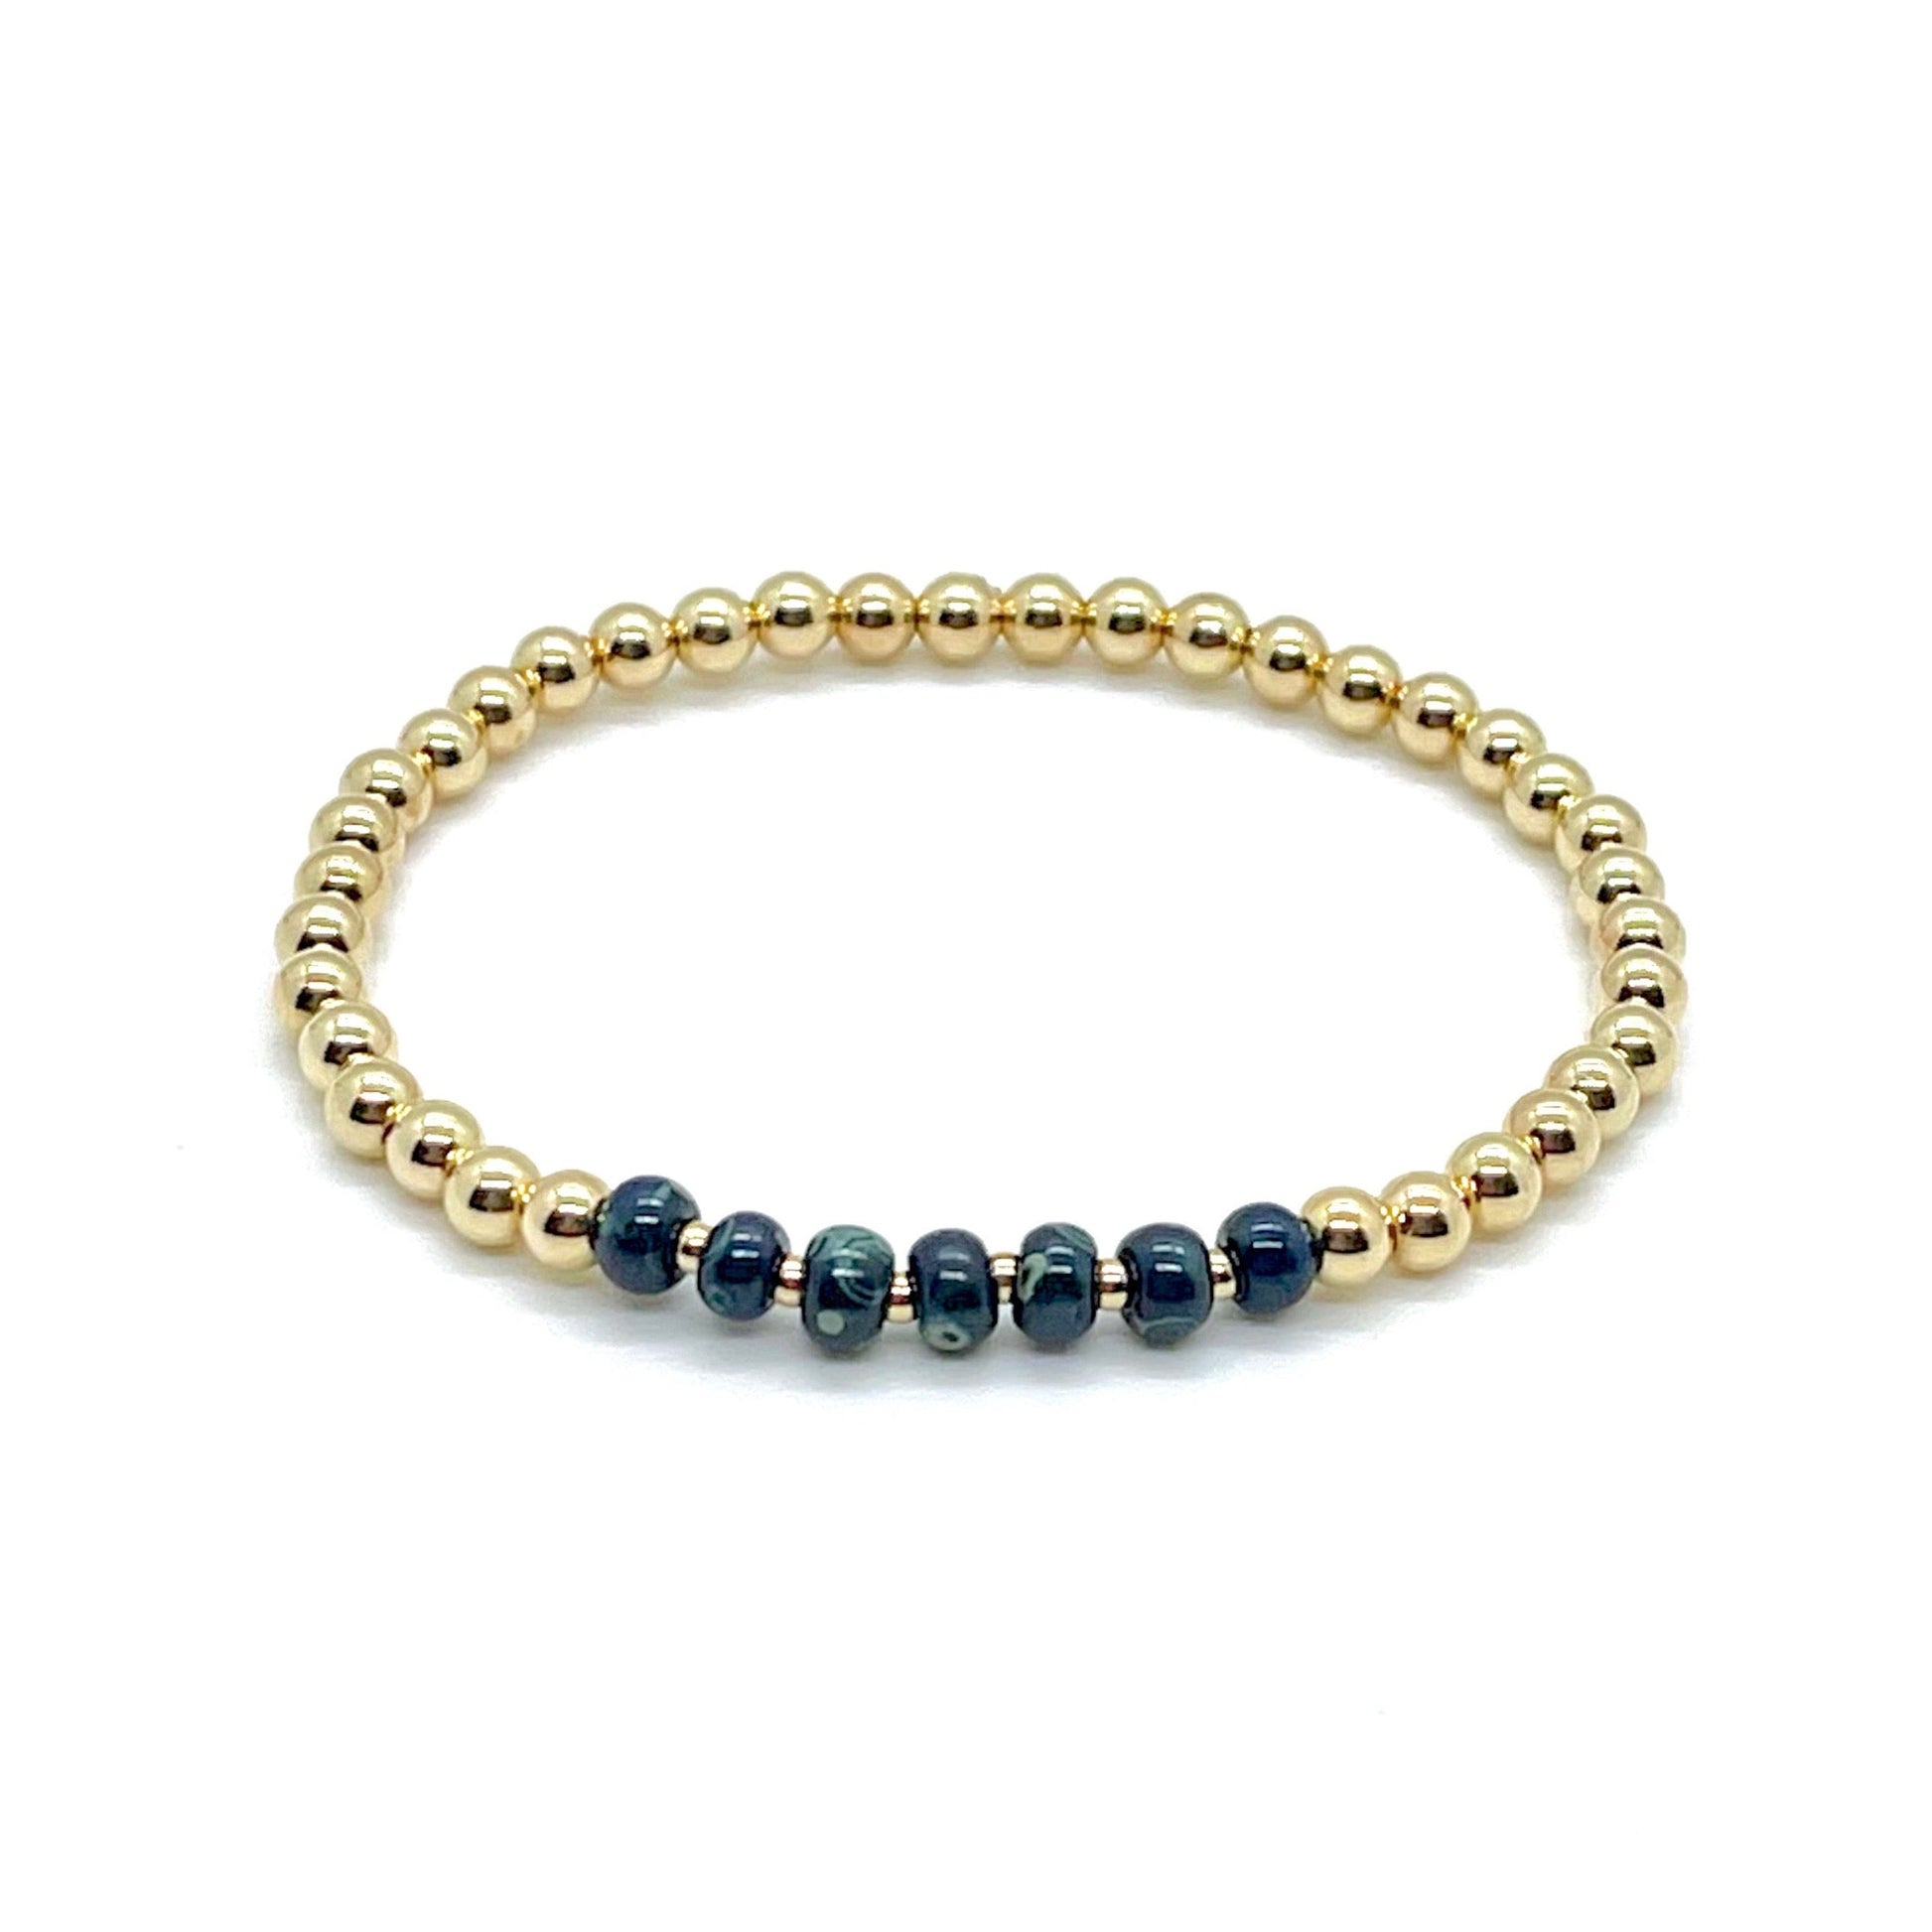 Tarnish resistant, water-safe, gold filled handmade beaded ball bracelet with large, blue marblized glass beads.